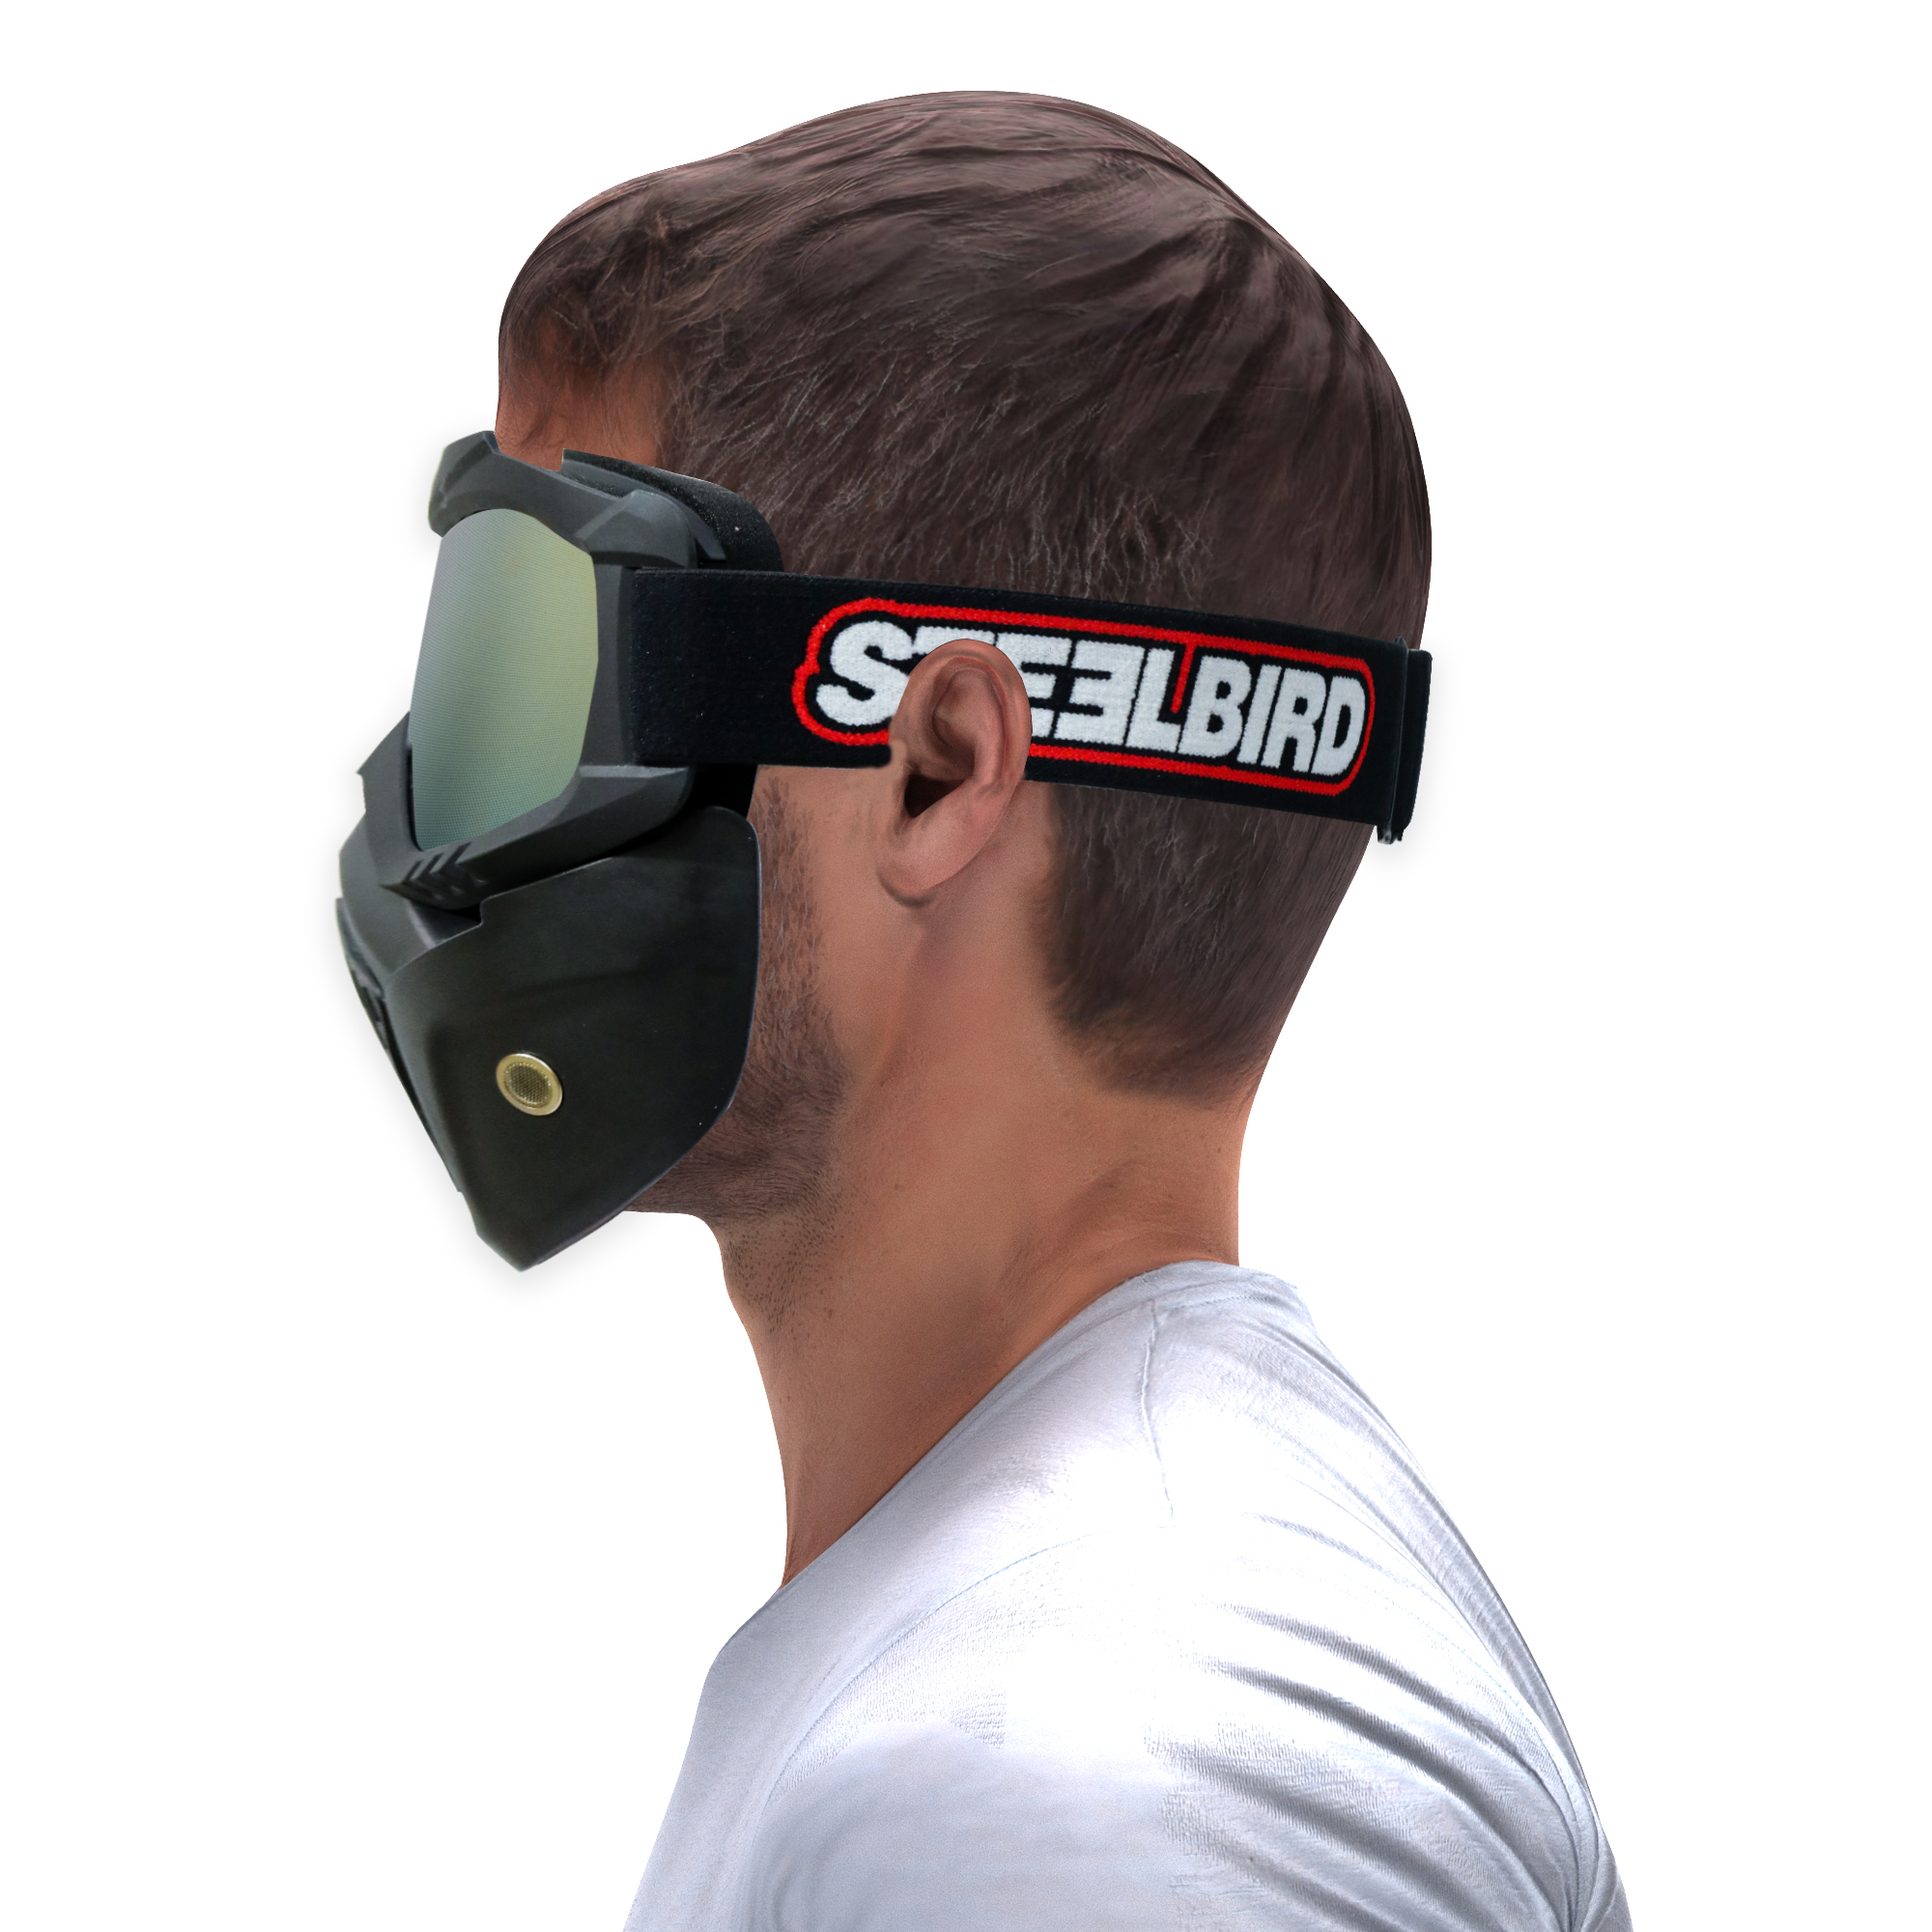 Steelbird 3 In 1 Unisex Face Shield Mask, Goggle (Golden Glass) 